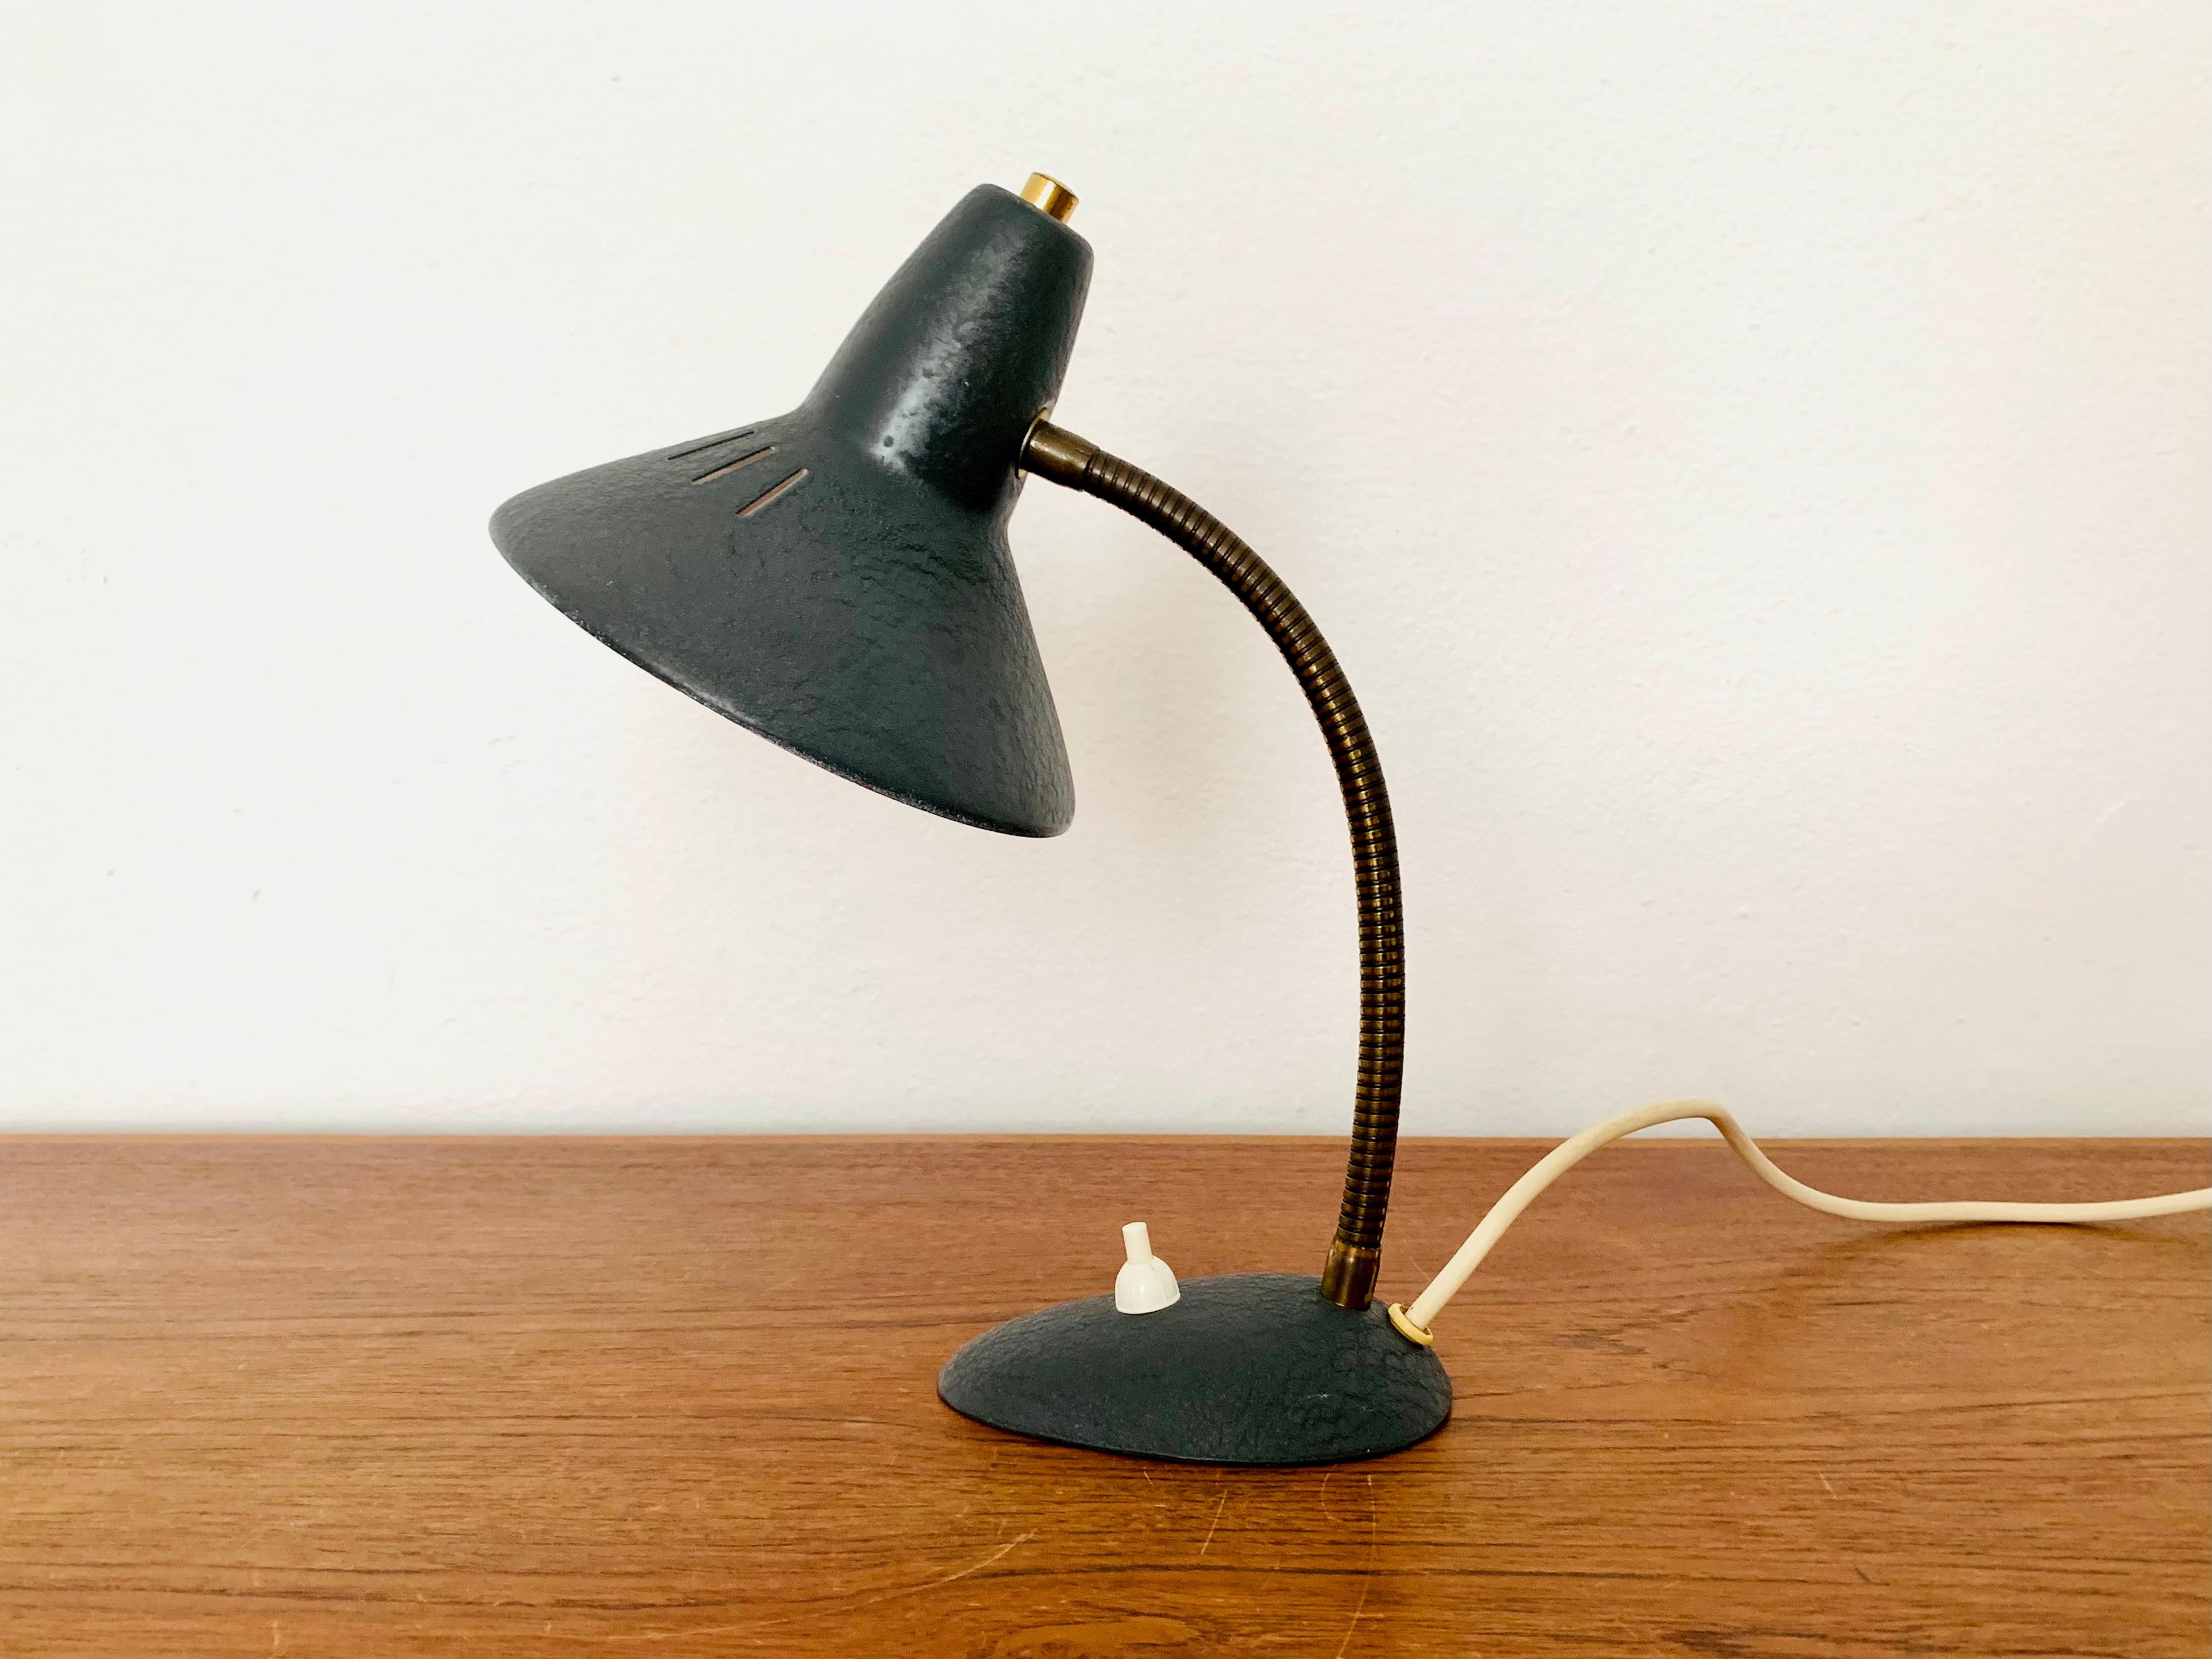 Very nice table lamp from the 1950s.
Wonderful timeless design with lovely details.
The lampshade can be flexibly adjusted.
It creates a very warm light and a great play of light.

Condition:

Very good vintage condition with slight signs of wear